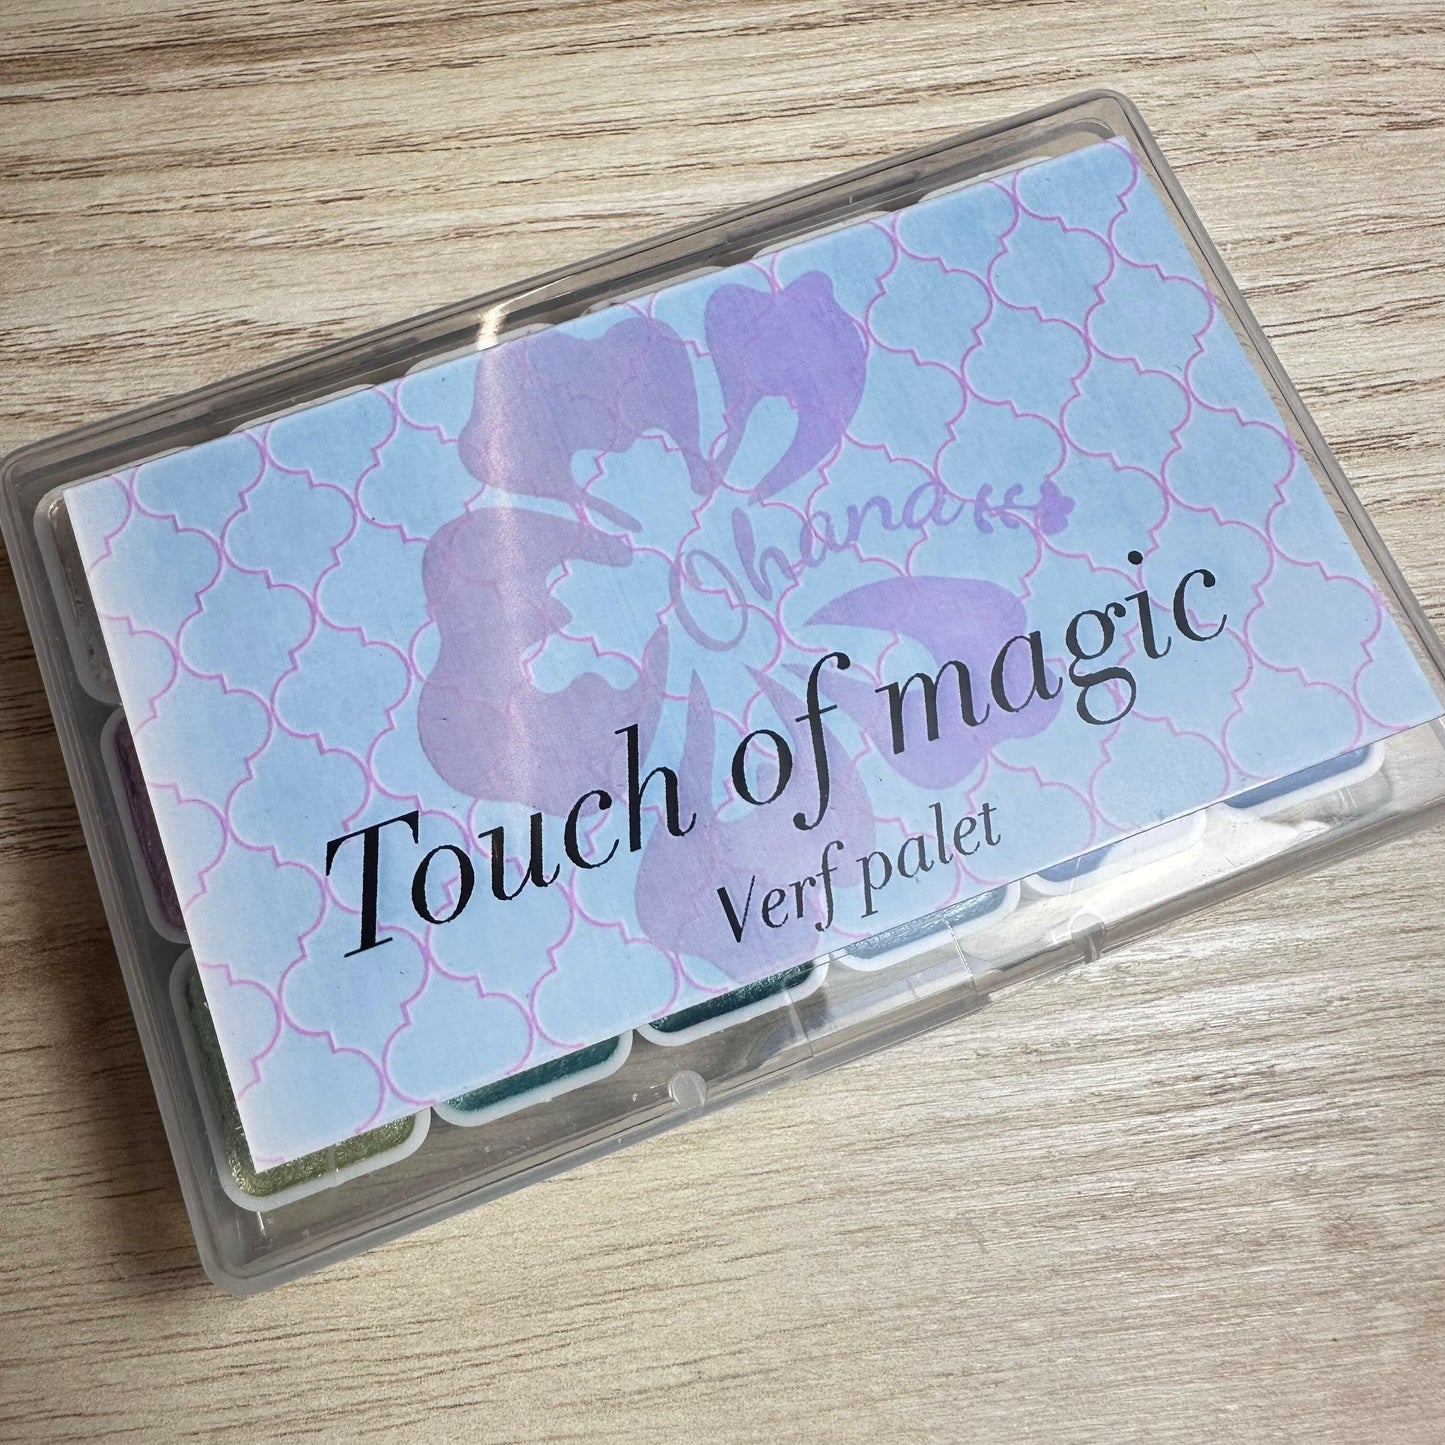 Ohana touch of magic palet